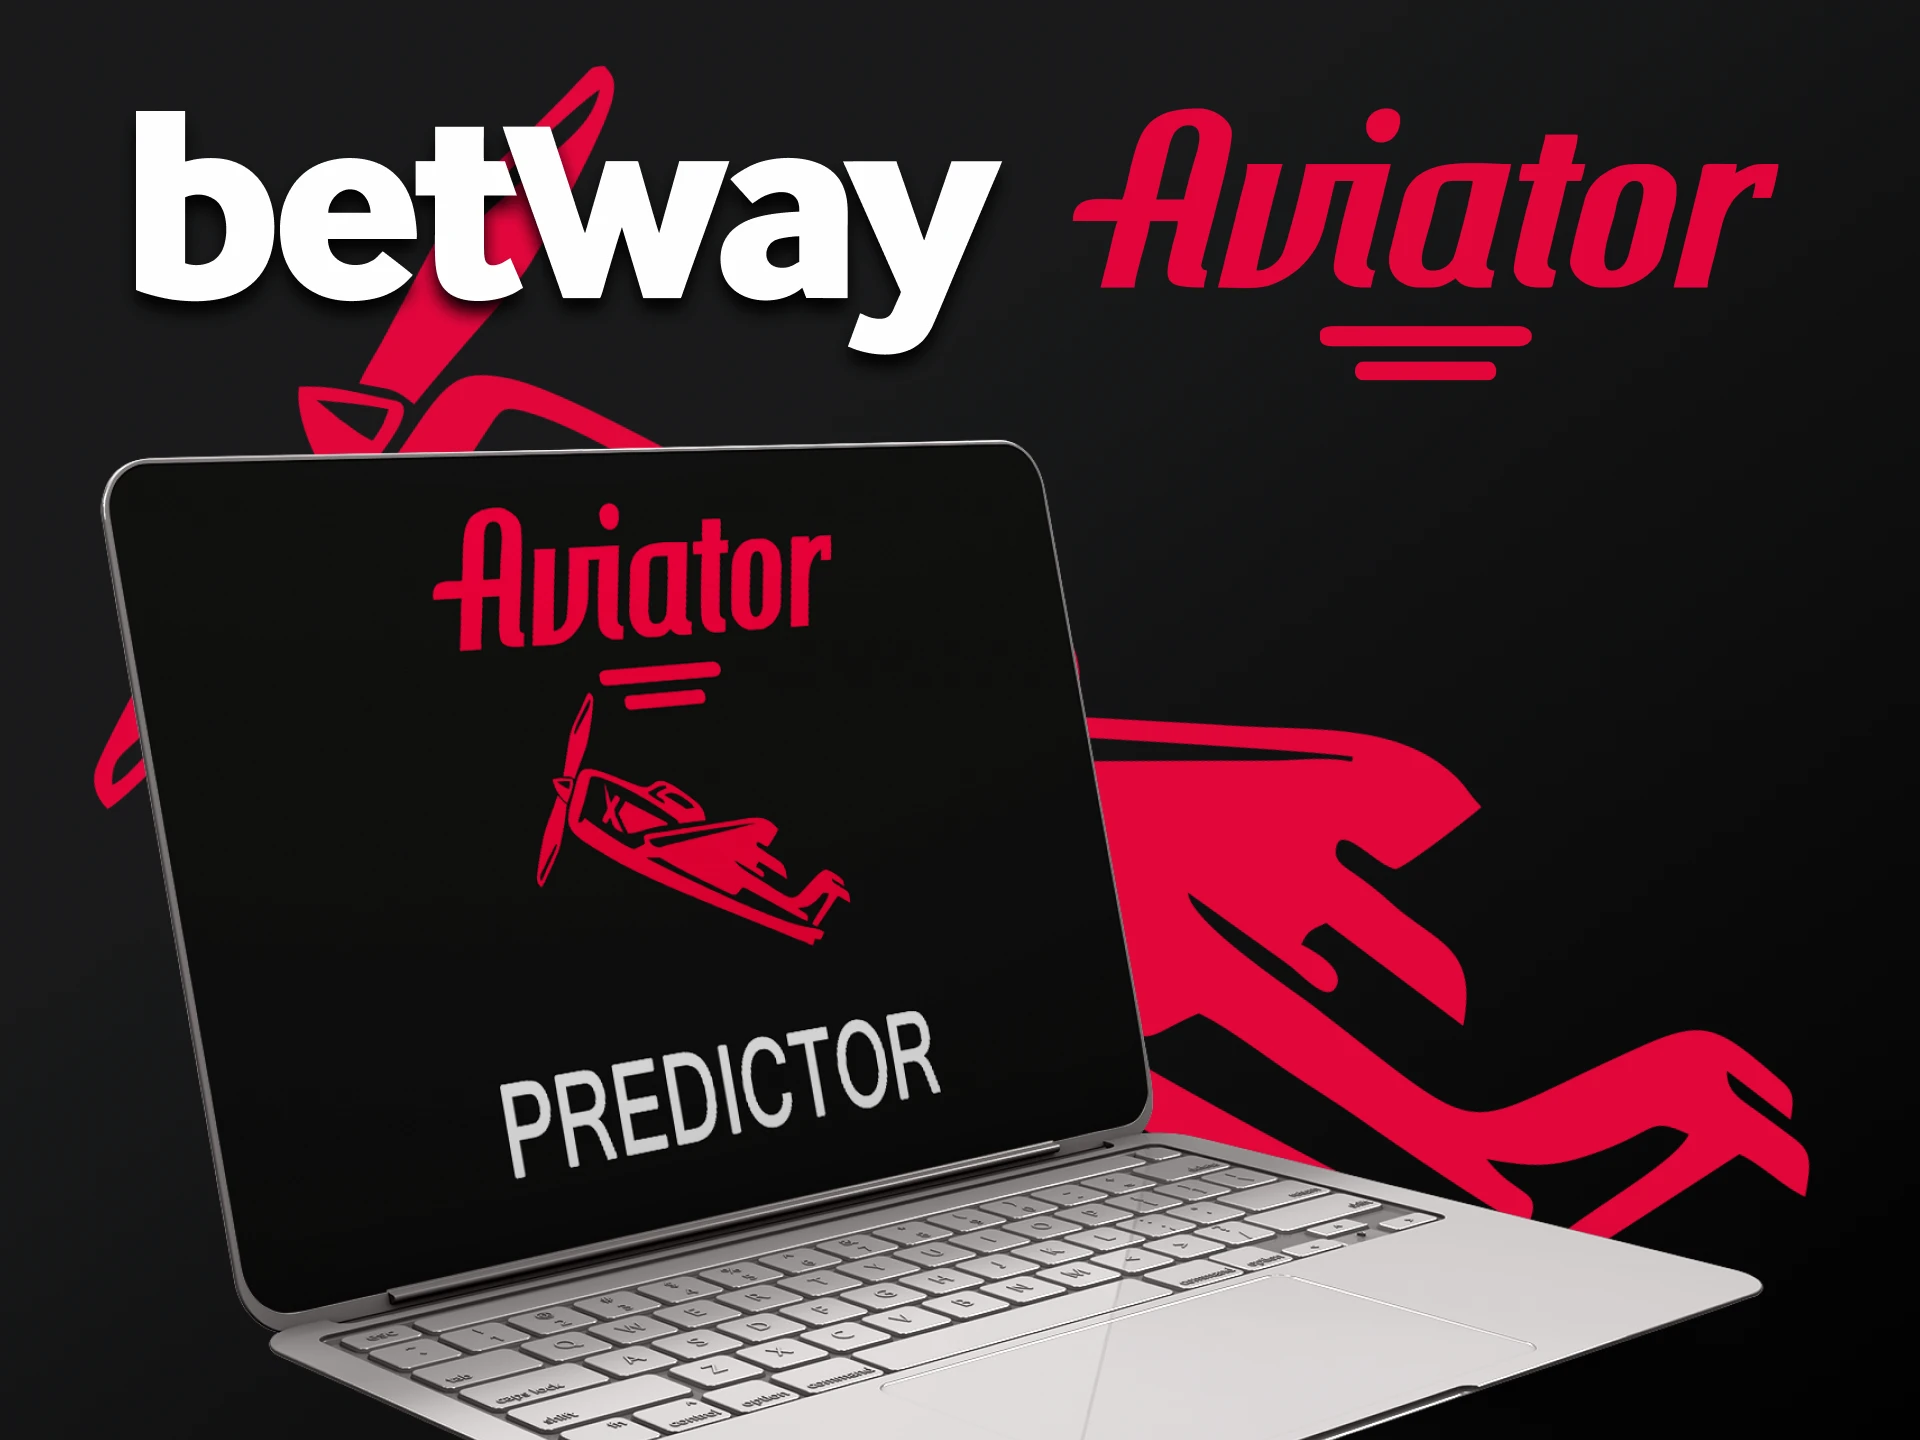 Use the Predictor on the Betway website for Aviator.